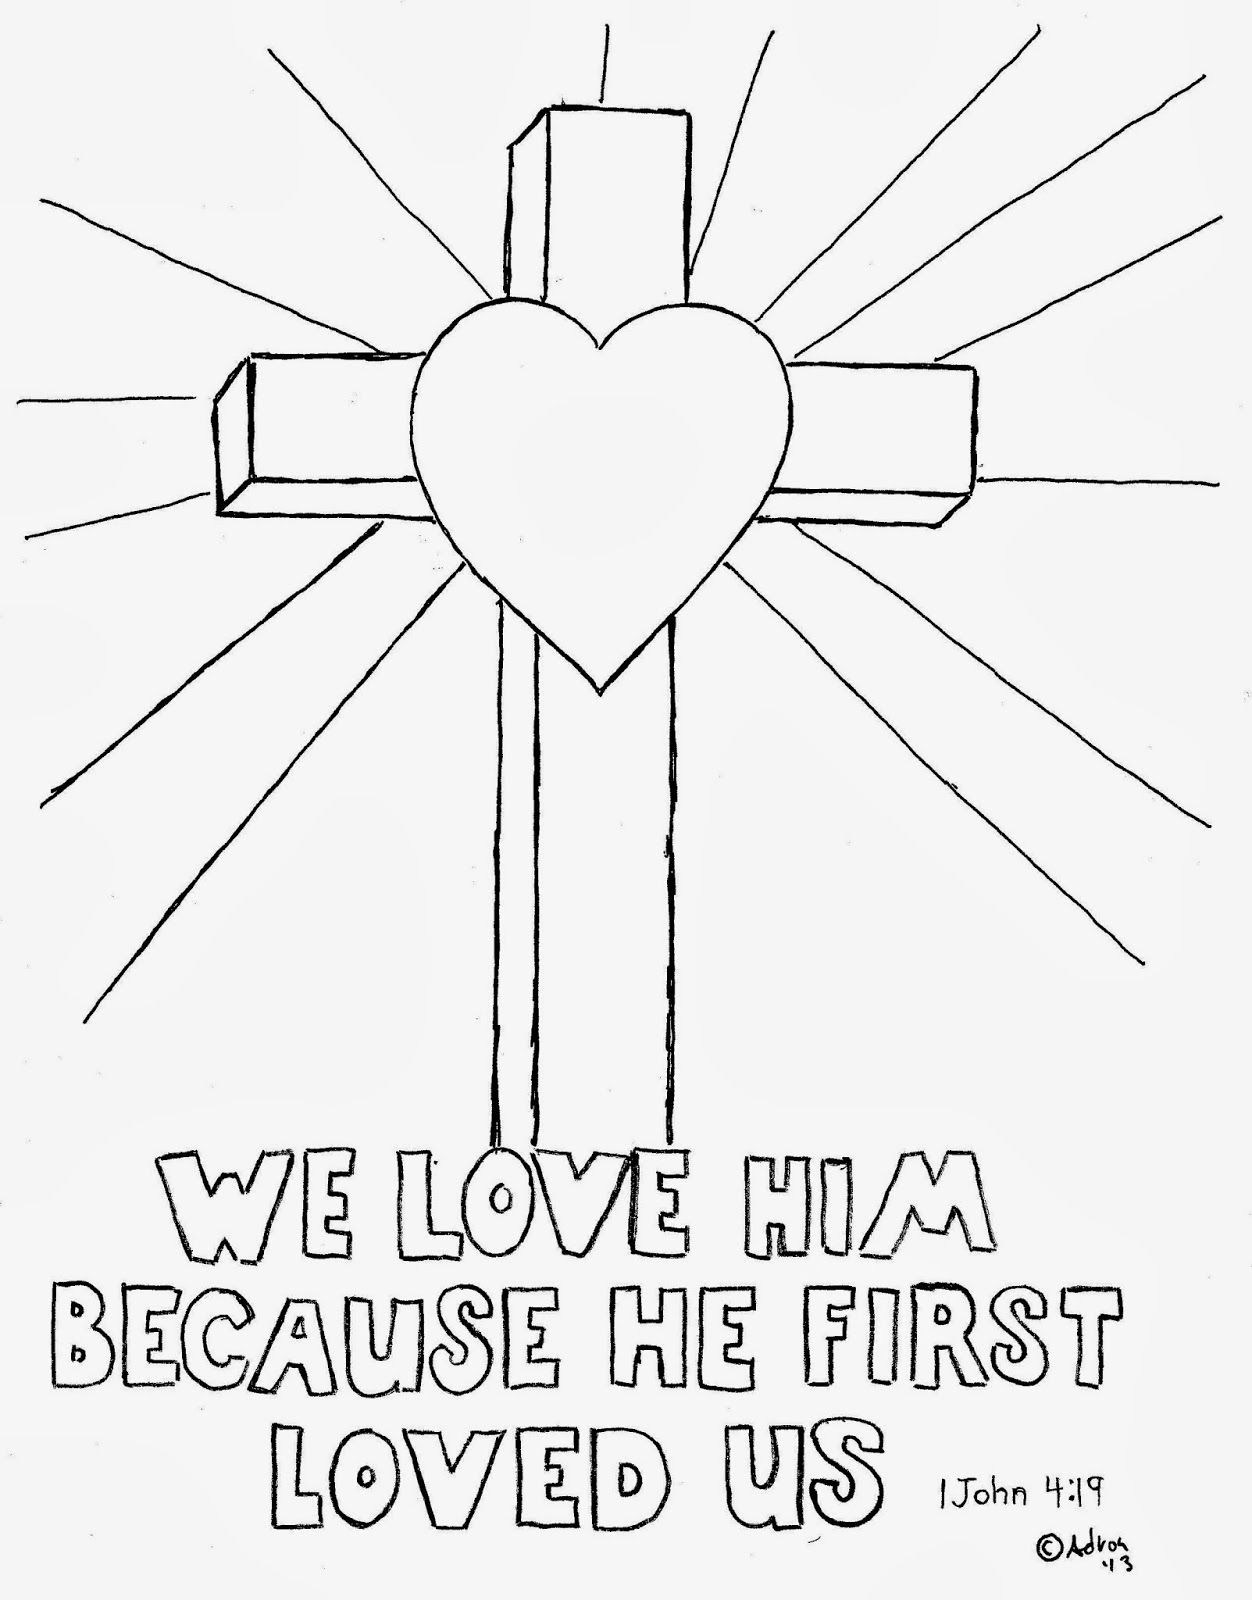 Coloring pages for kids by mr adron cross coloring picture we love him because he first loveâ sunday school coloring pages sunday school jesus coloring pages